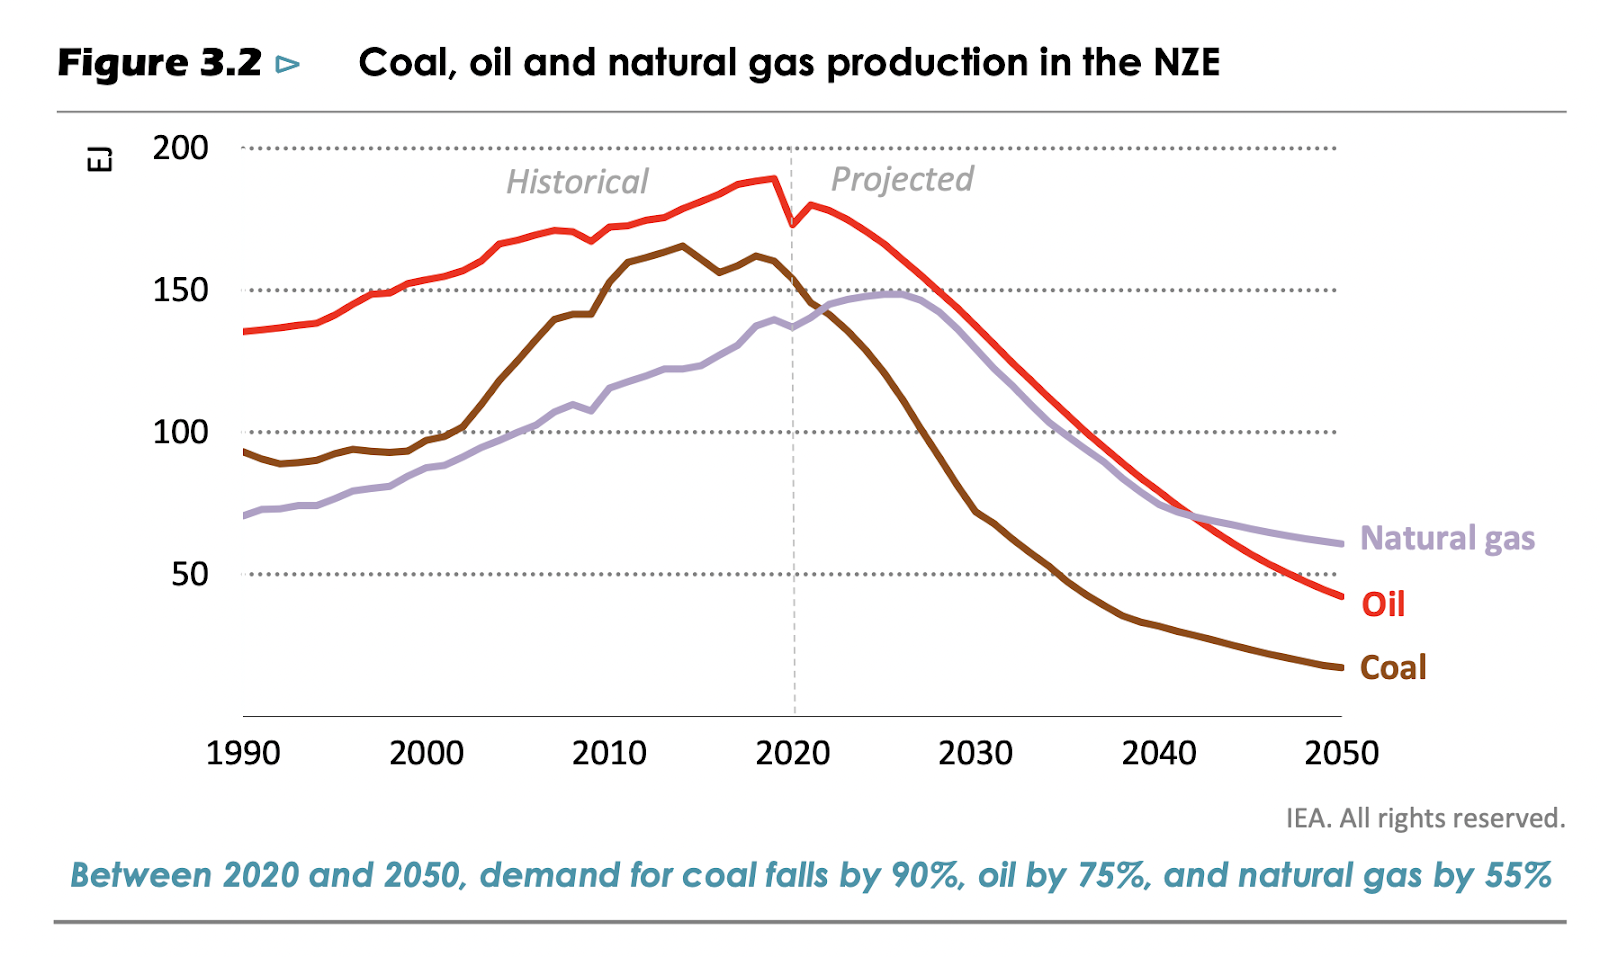 Coal, oil and natural gas production